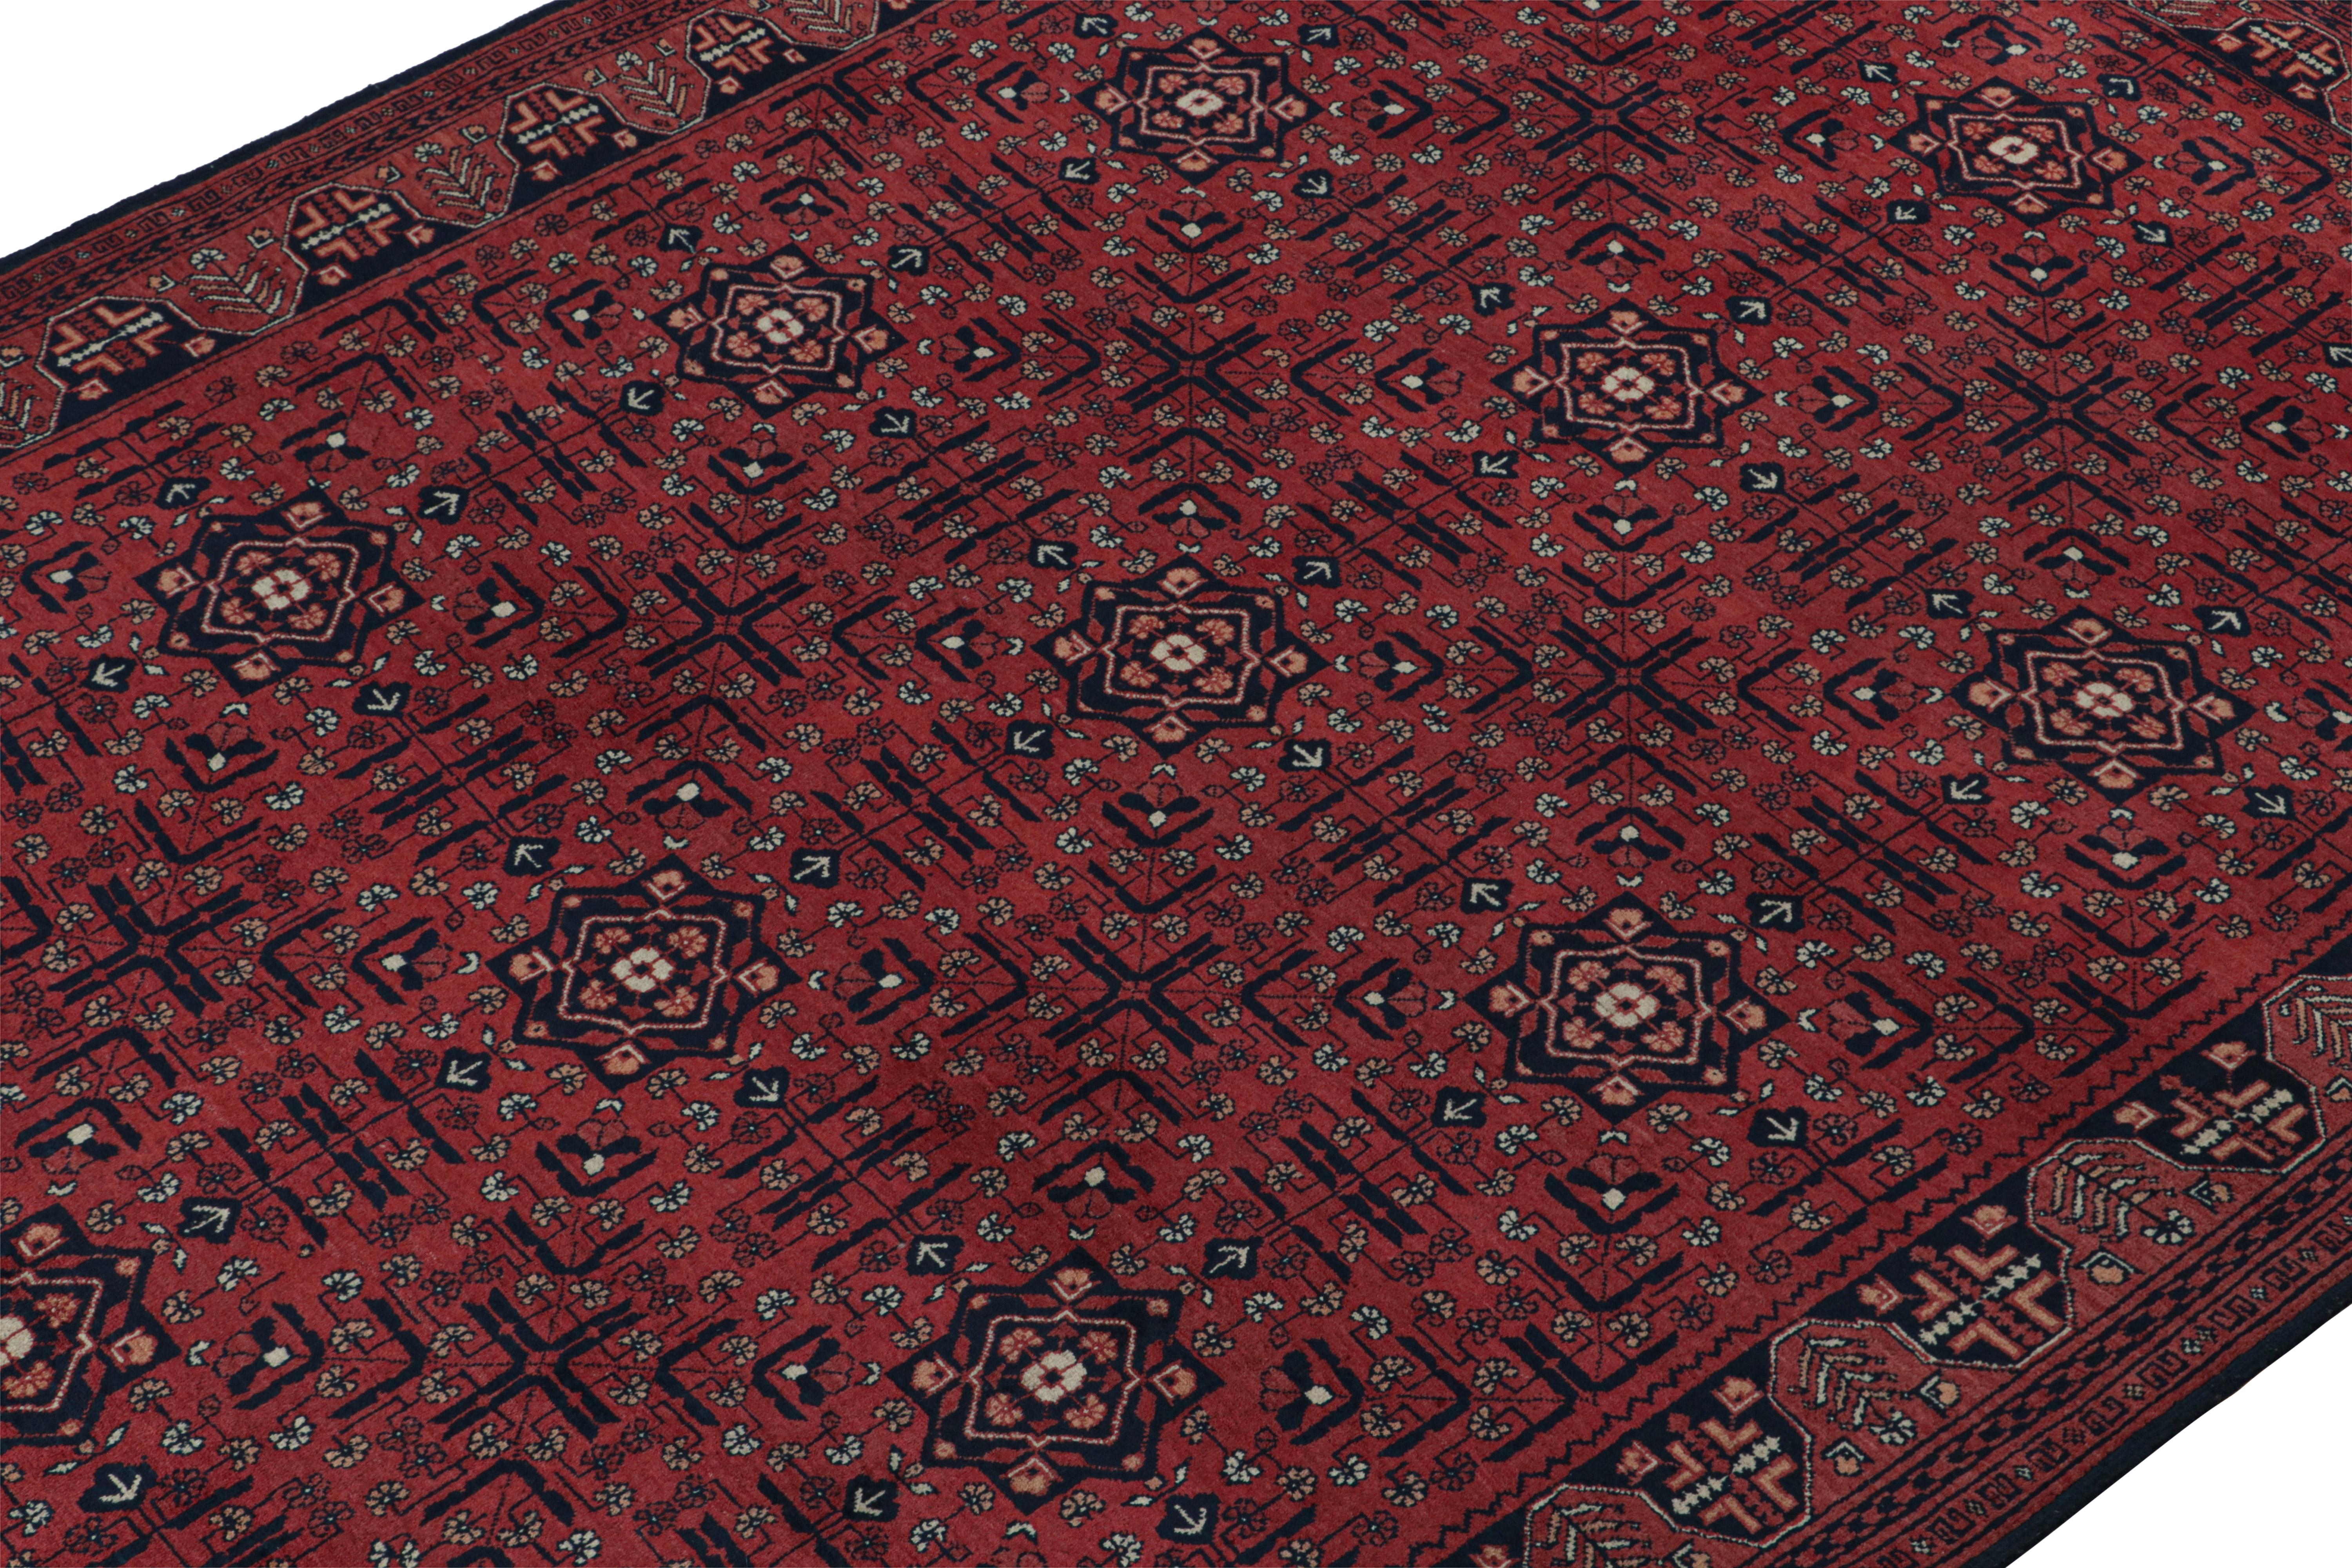 Rug & Kilim’s Afghan Baluch Tribal Rug in Burgundy and Blue Geometric Patterns In New Condition For Sale In Long Island City, NY